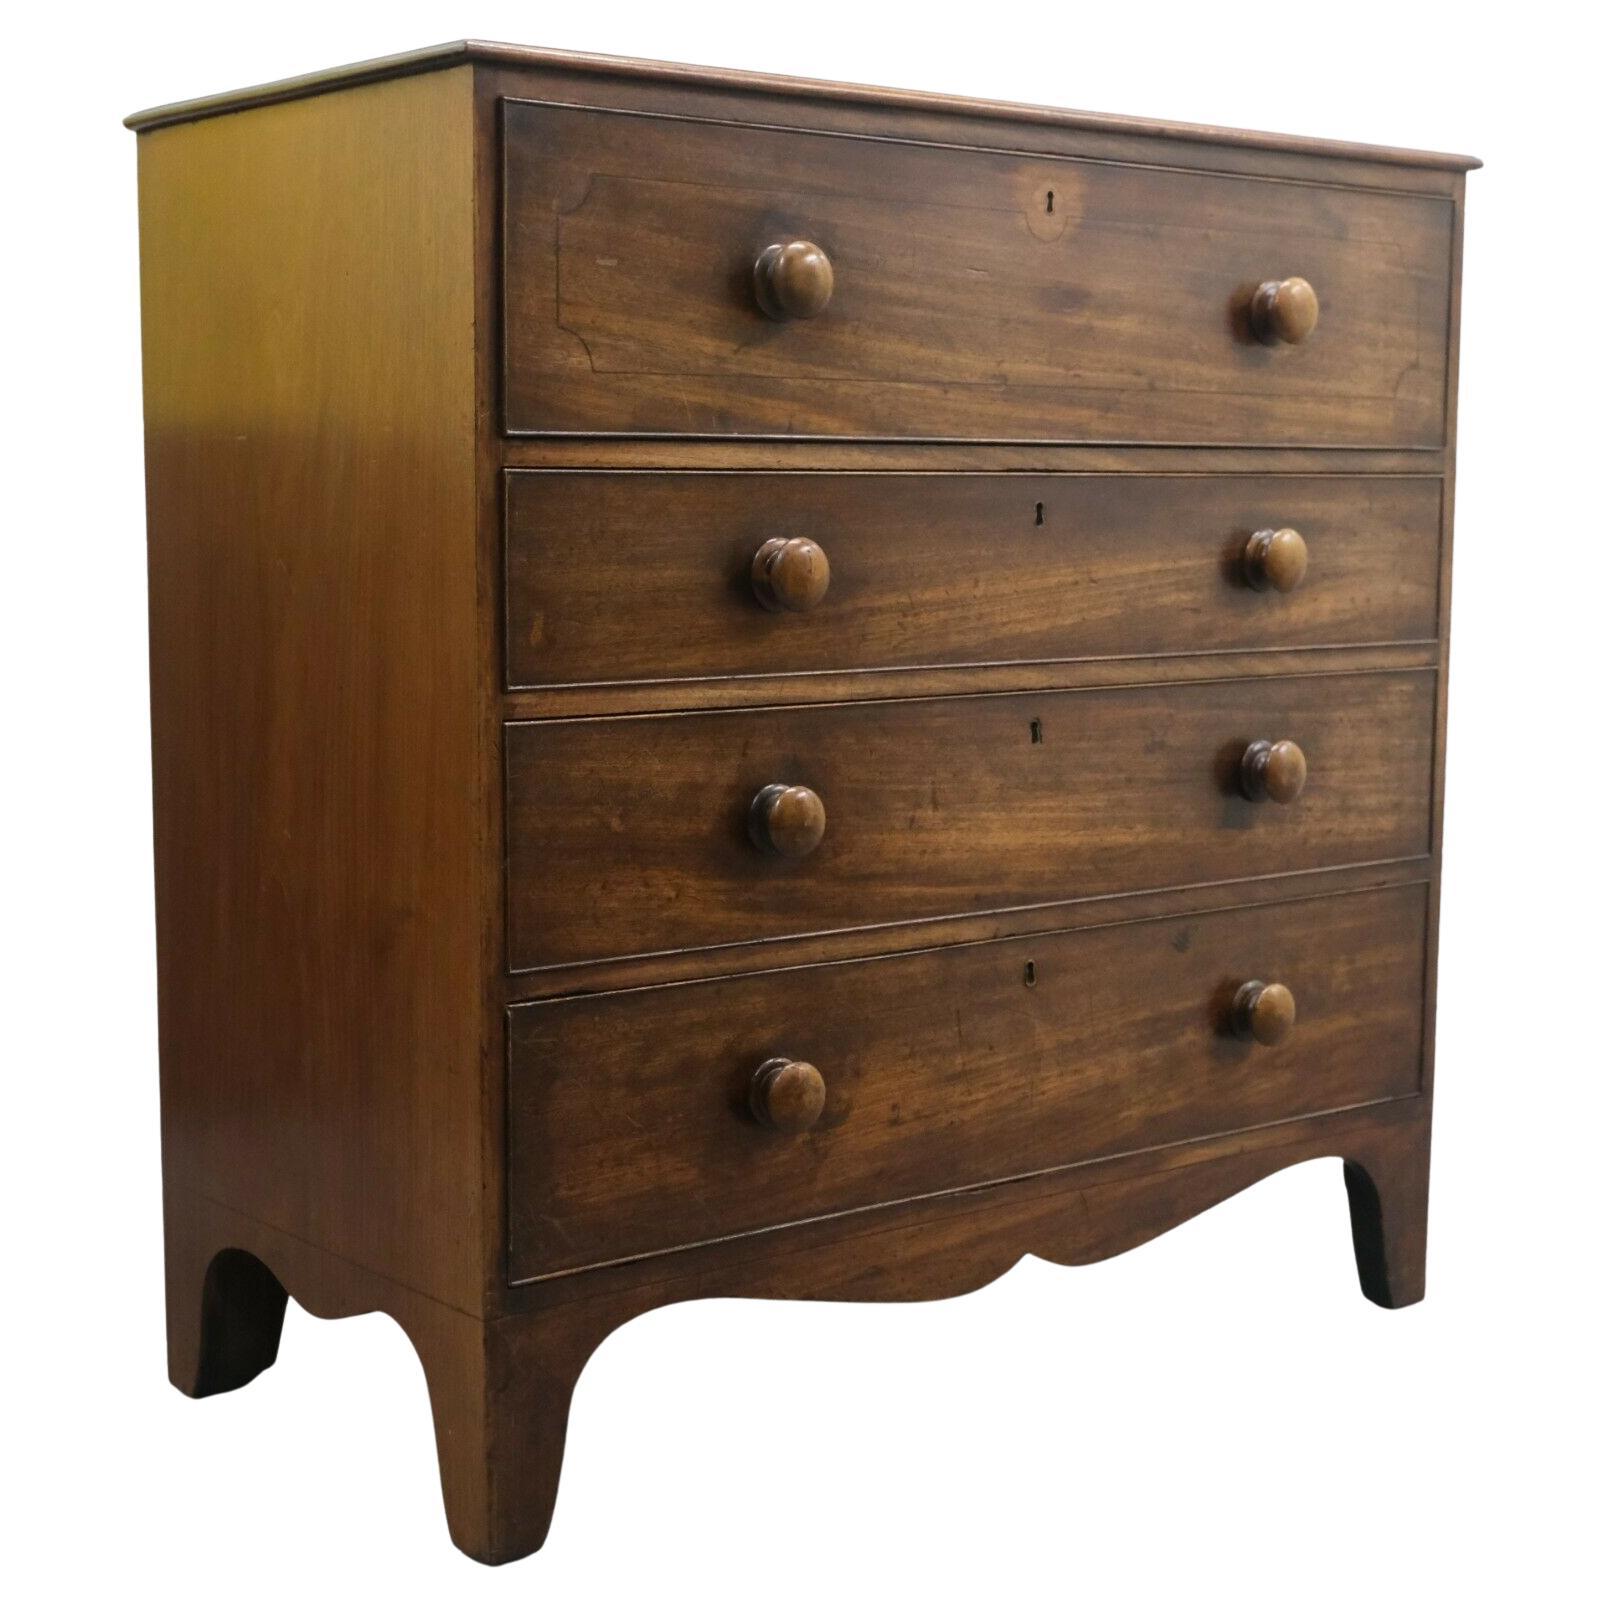 19th Century Mahogany Secretaire Chest of Drawers with Revealing Fitted Interior